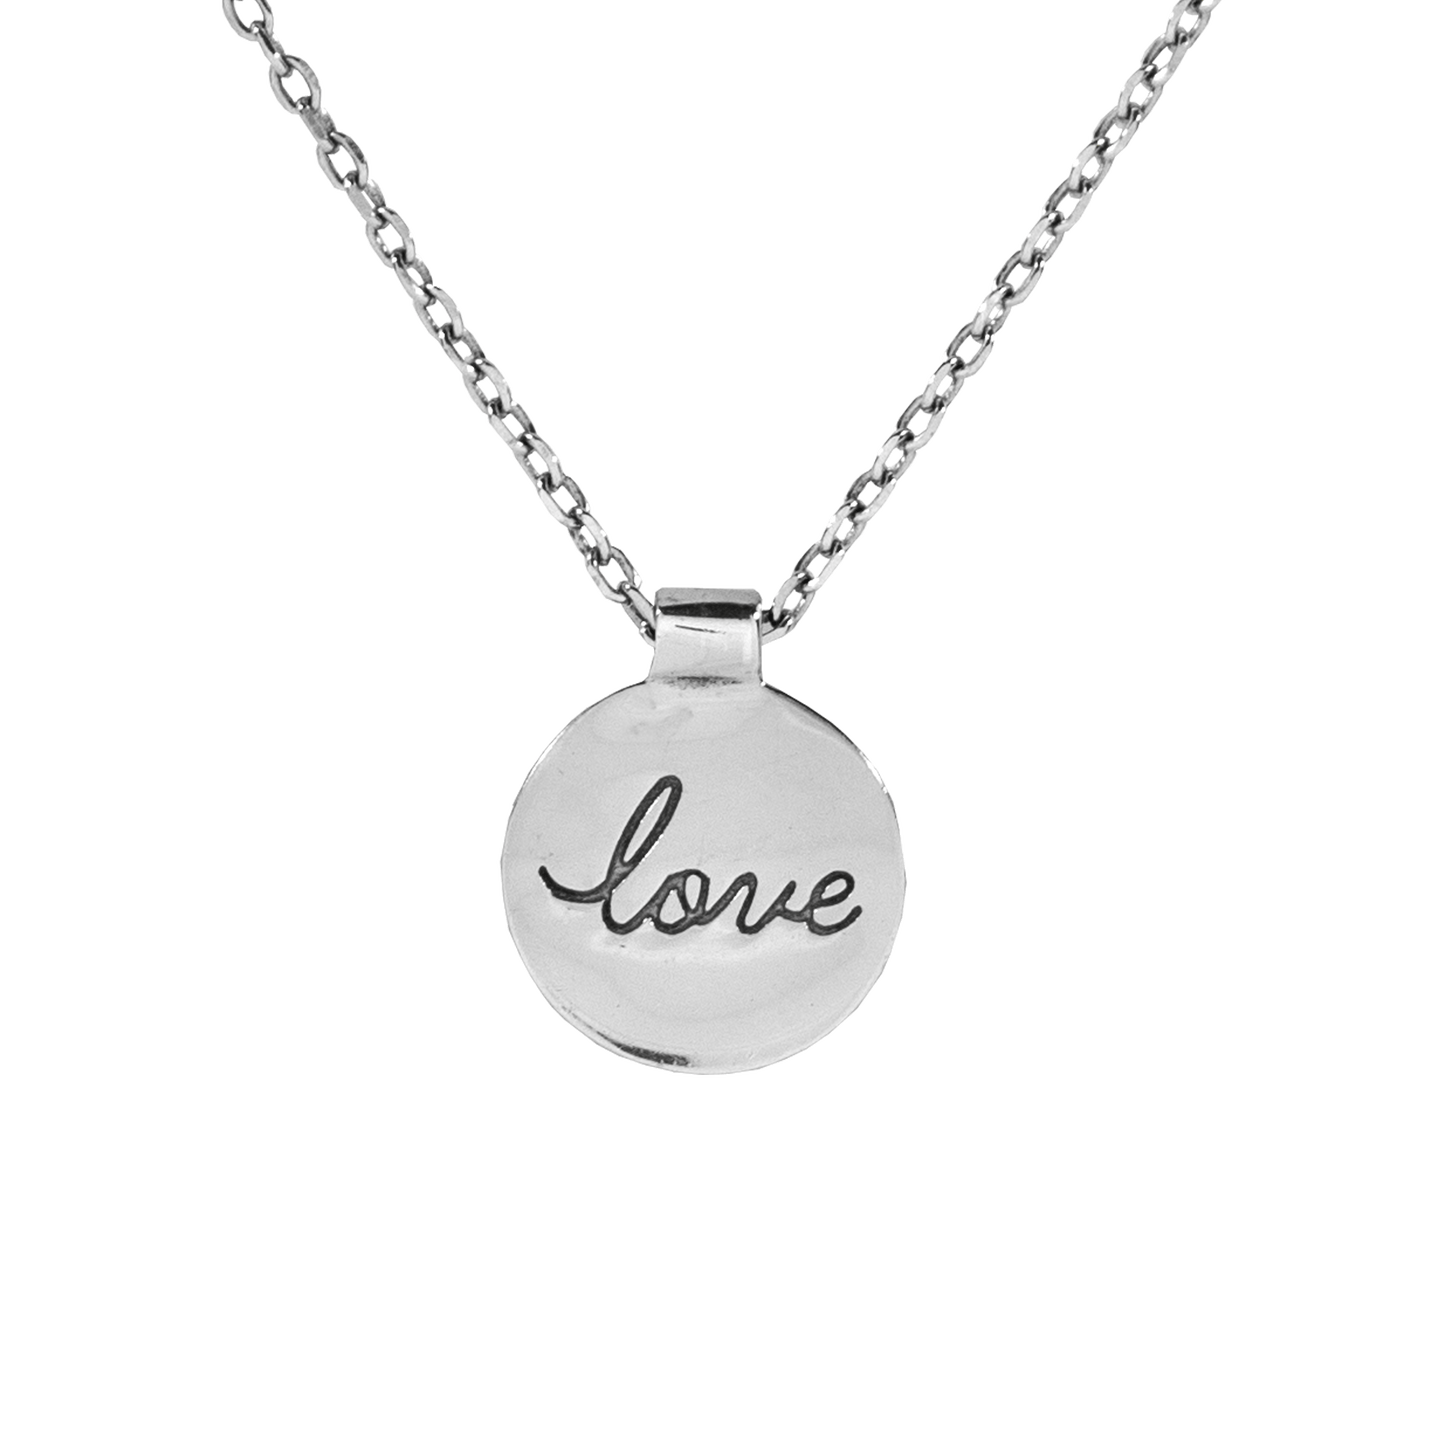 Sterling Silver disc pendant with cursive "Love" written in the middle on sterling silver chain.